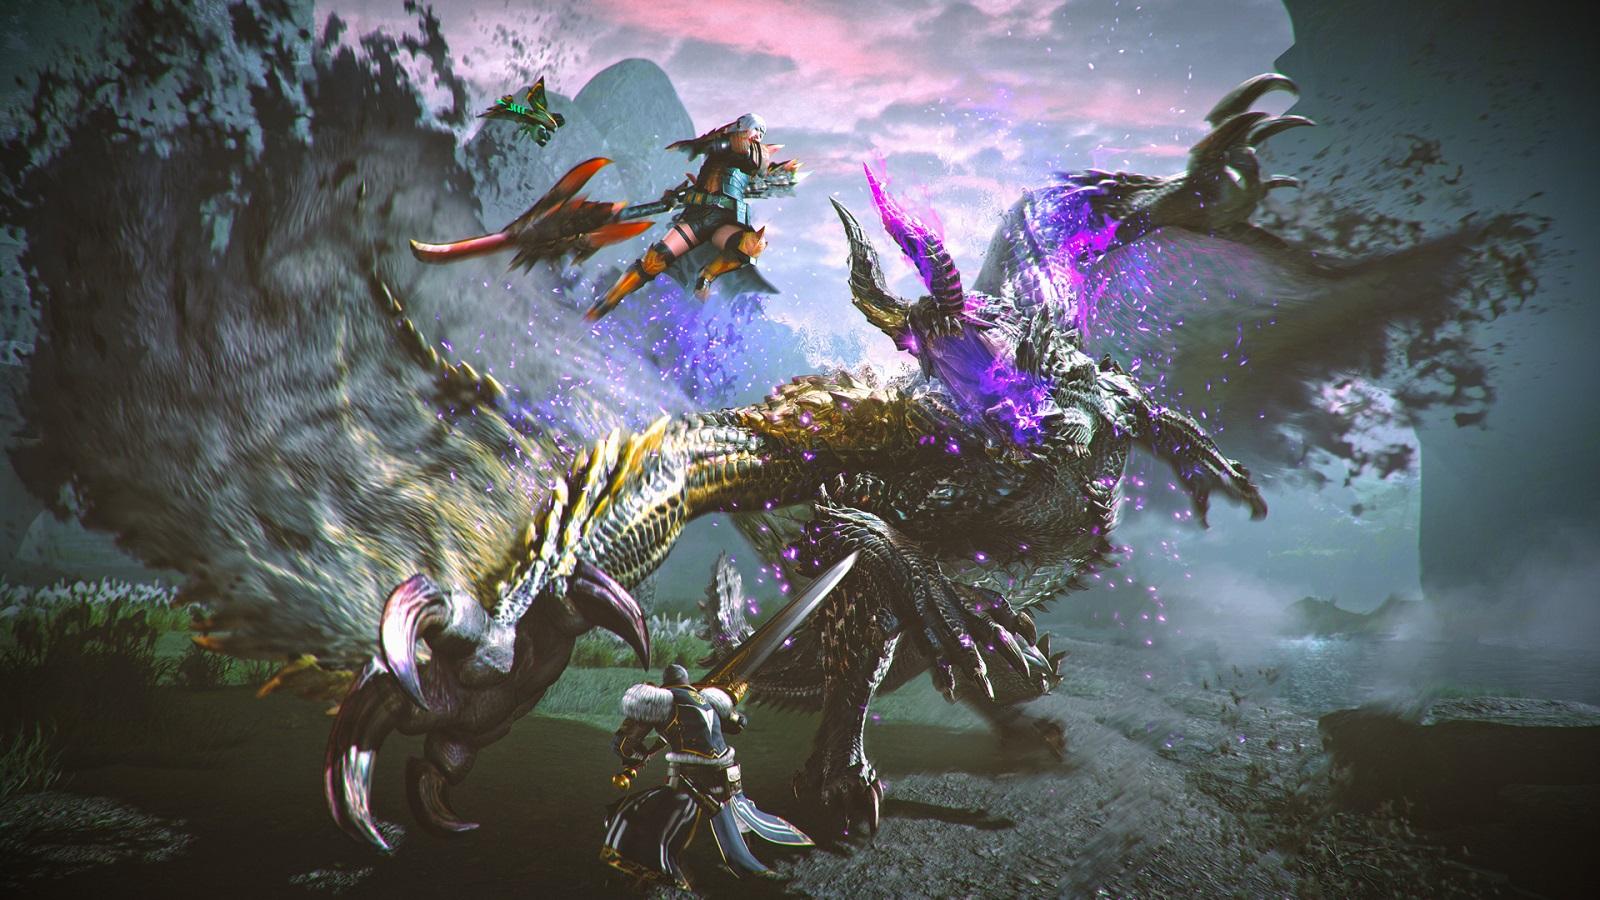 Monster Hunter Rise: Sunbreak is ready to unleash the beasts